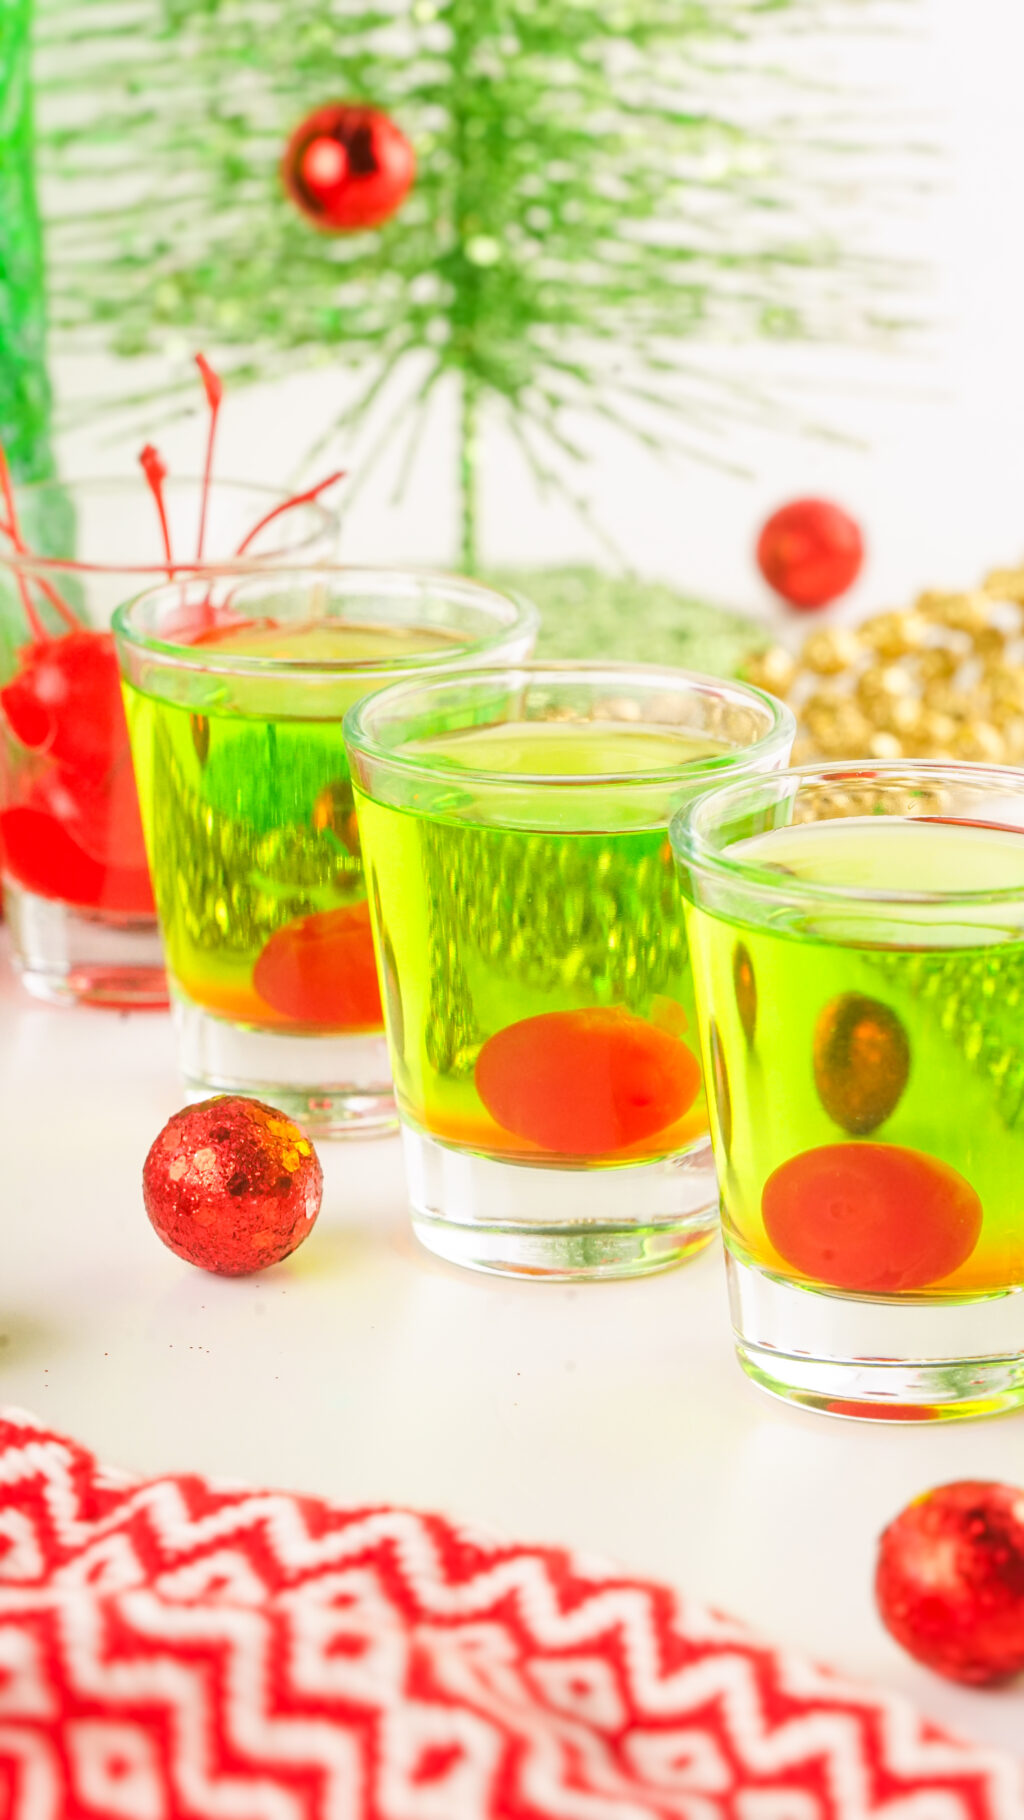 grinch shot glasses on table